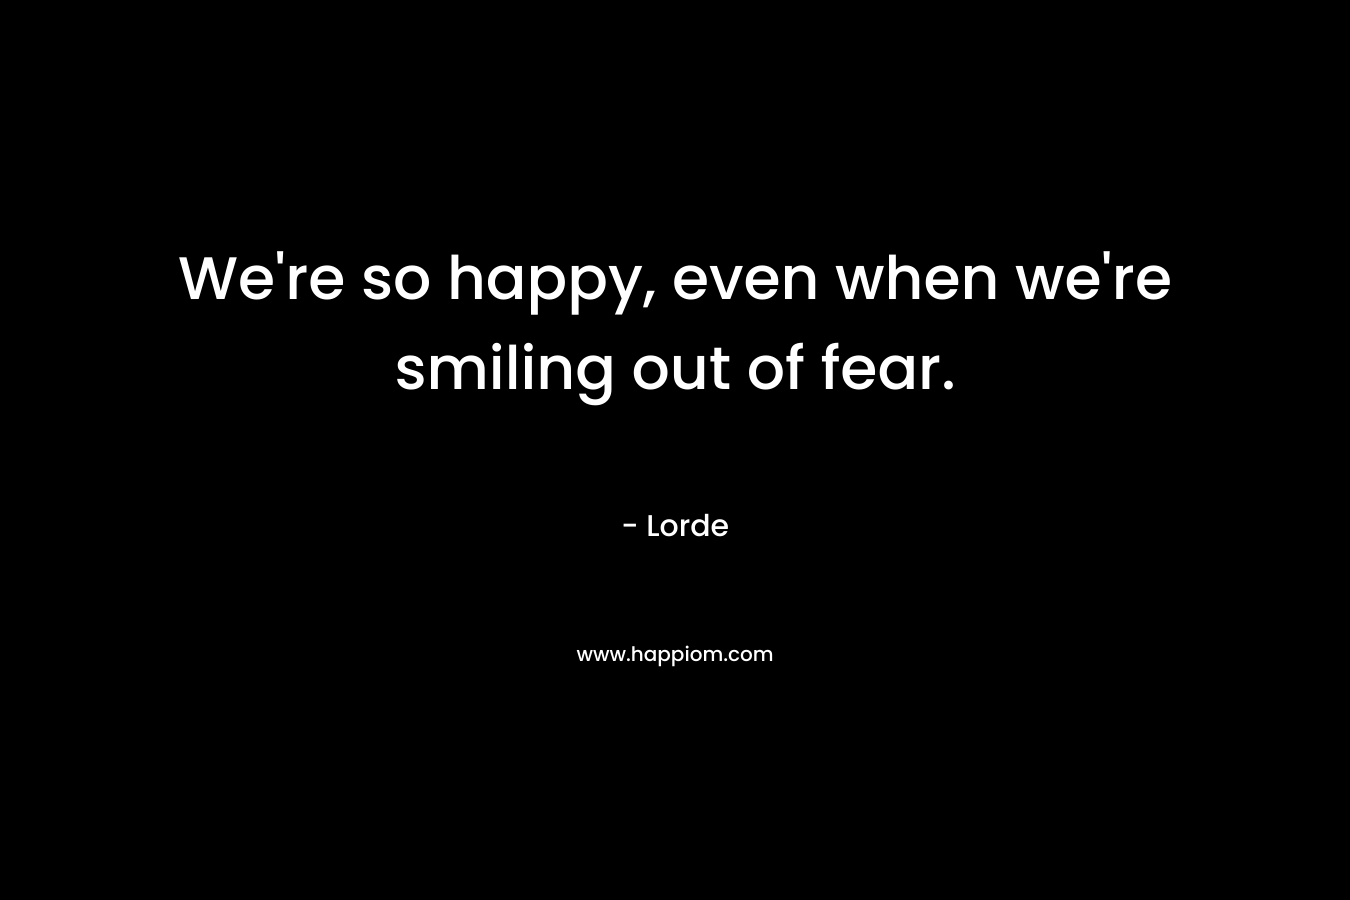 We're so happy, even when we're smiling out of fear.